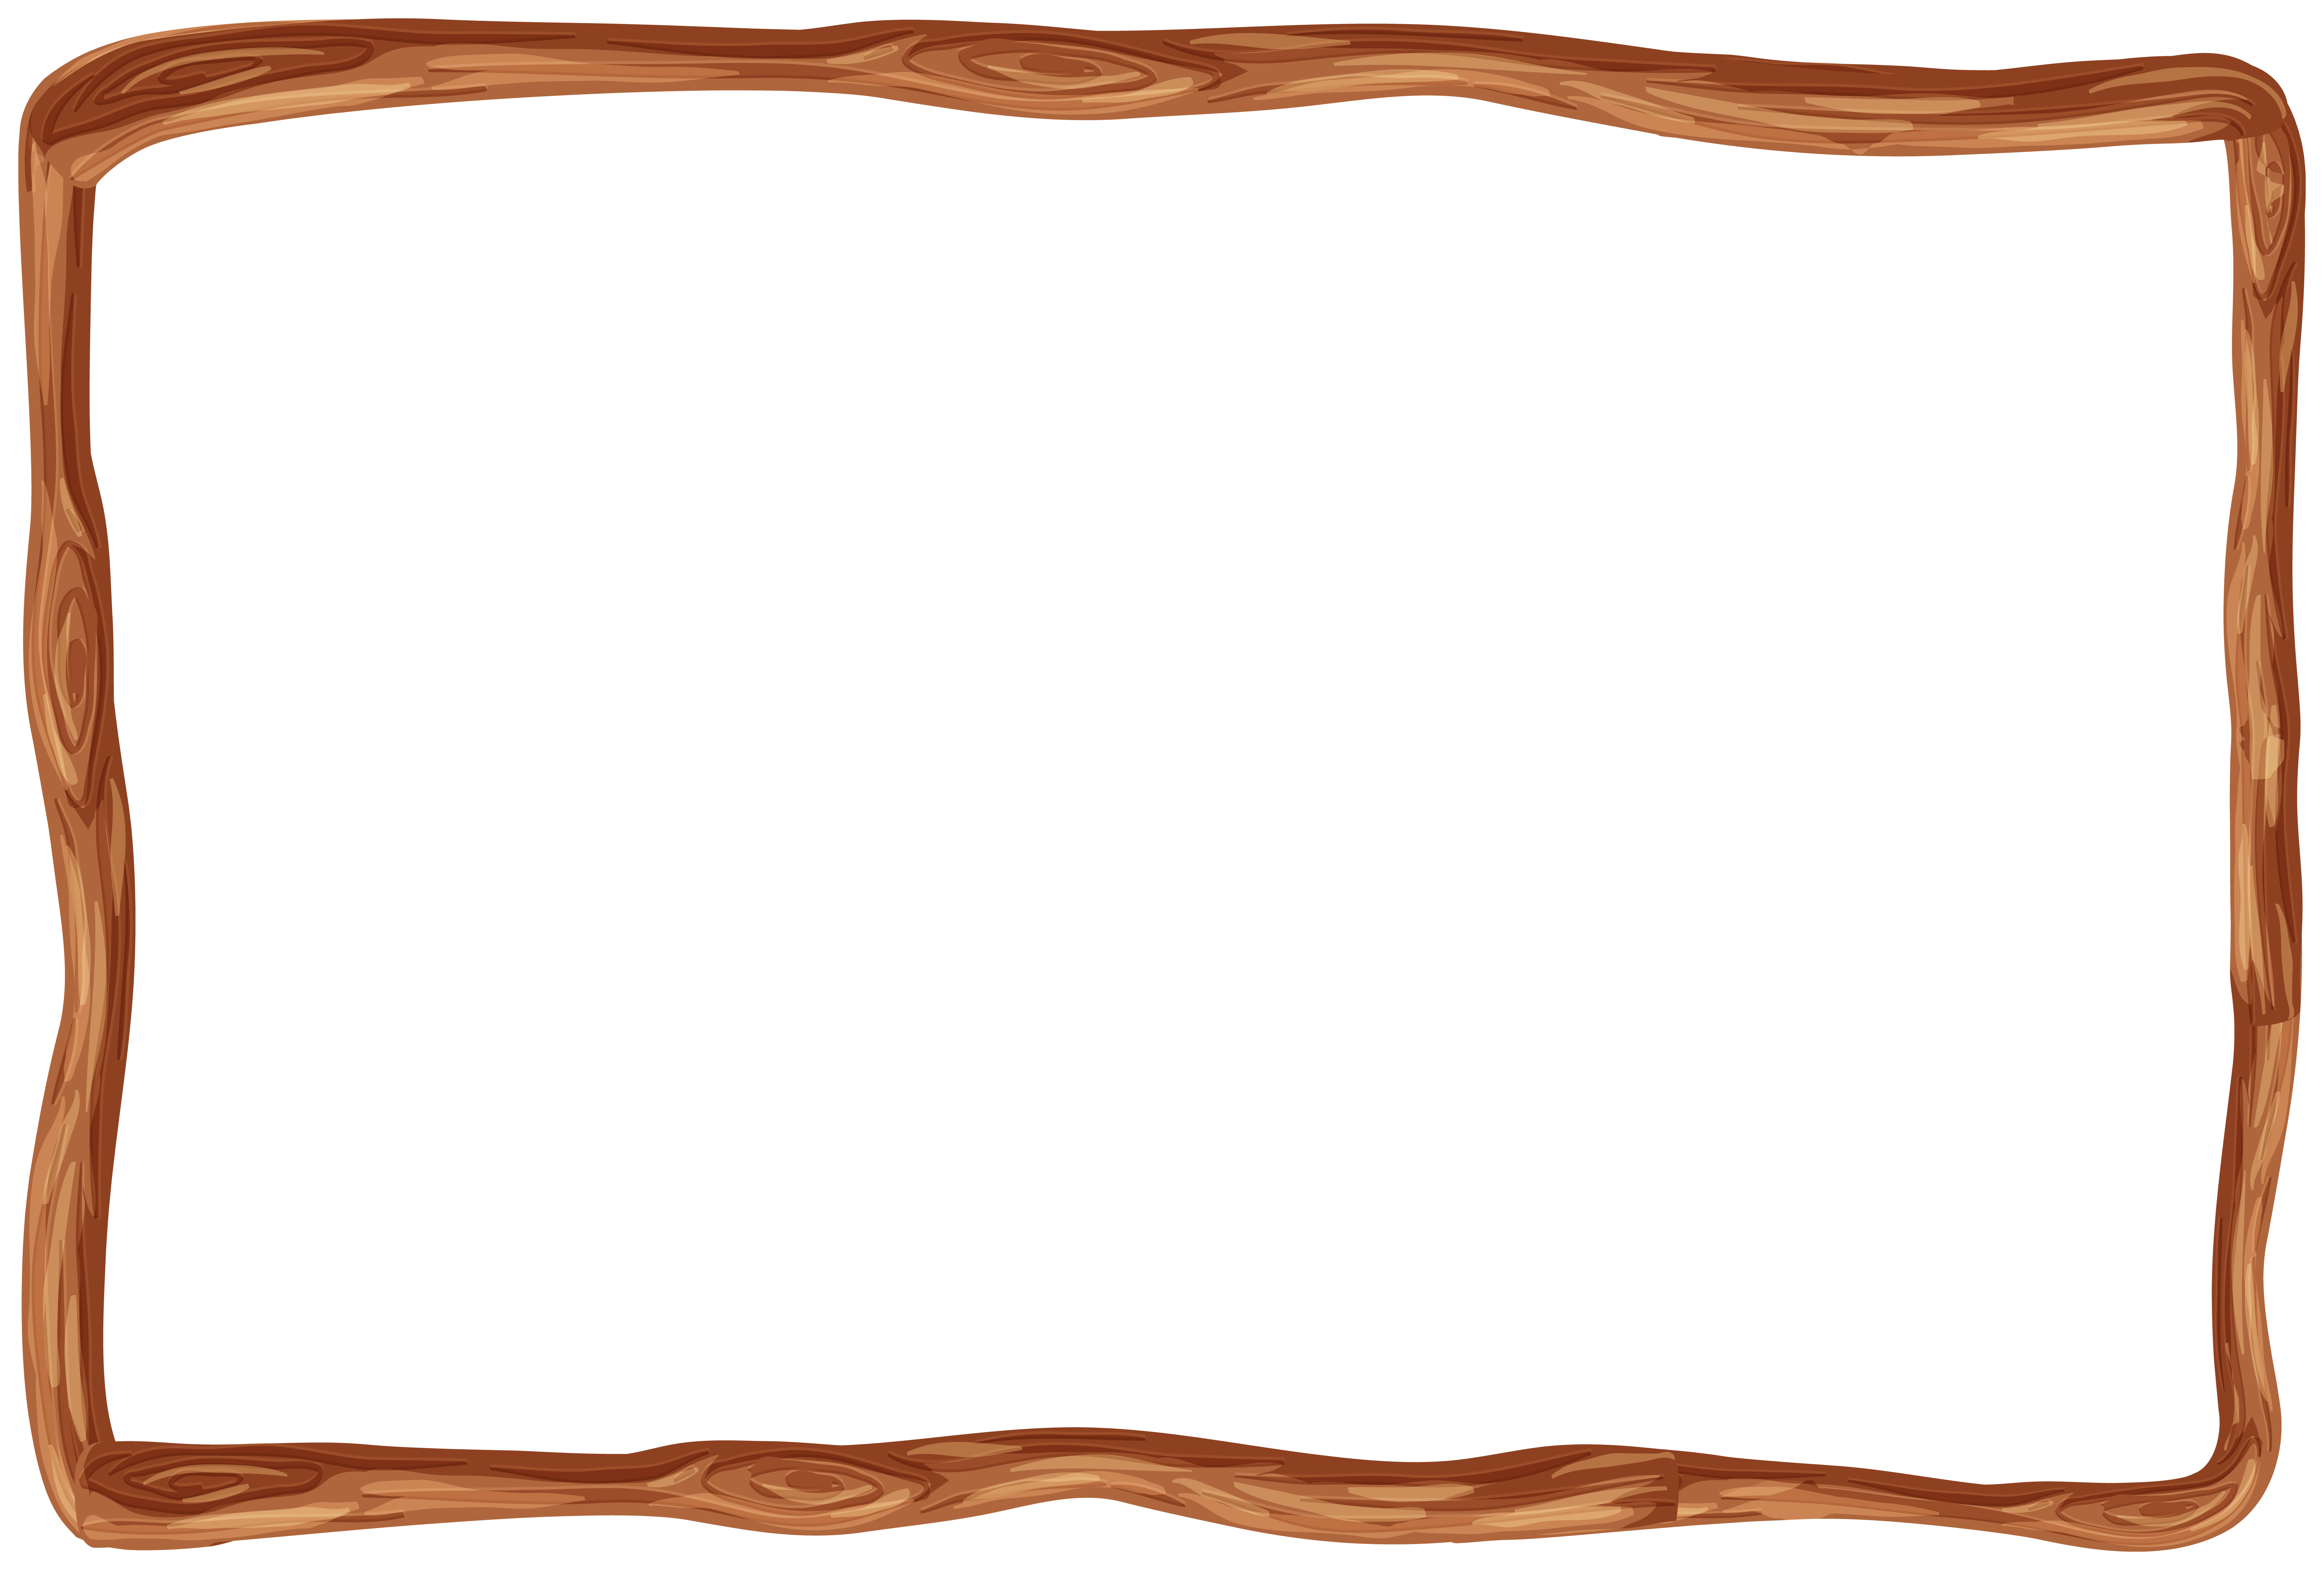 Wooden Frame Border PNG Clipart​ | Gallery Yopriceville - High-Quality Free  Images and Transparent PNG Clipart